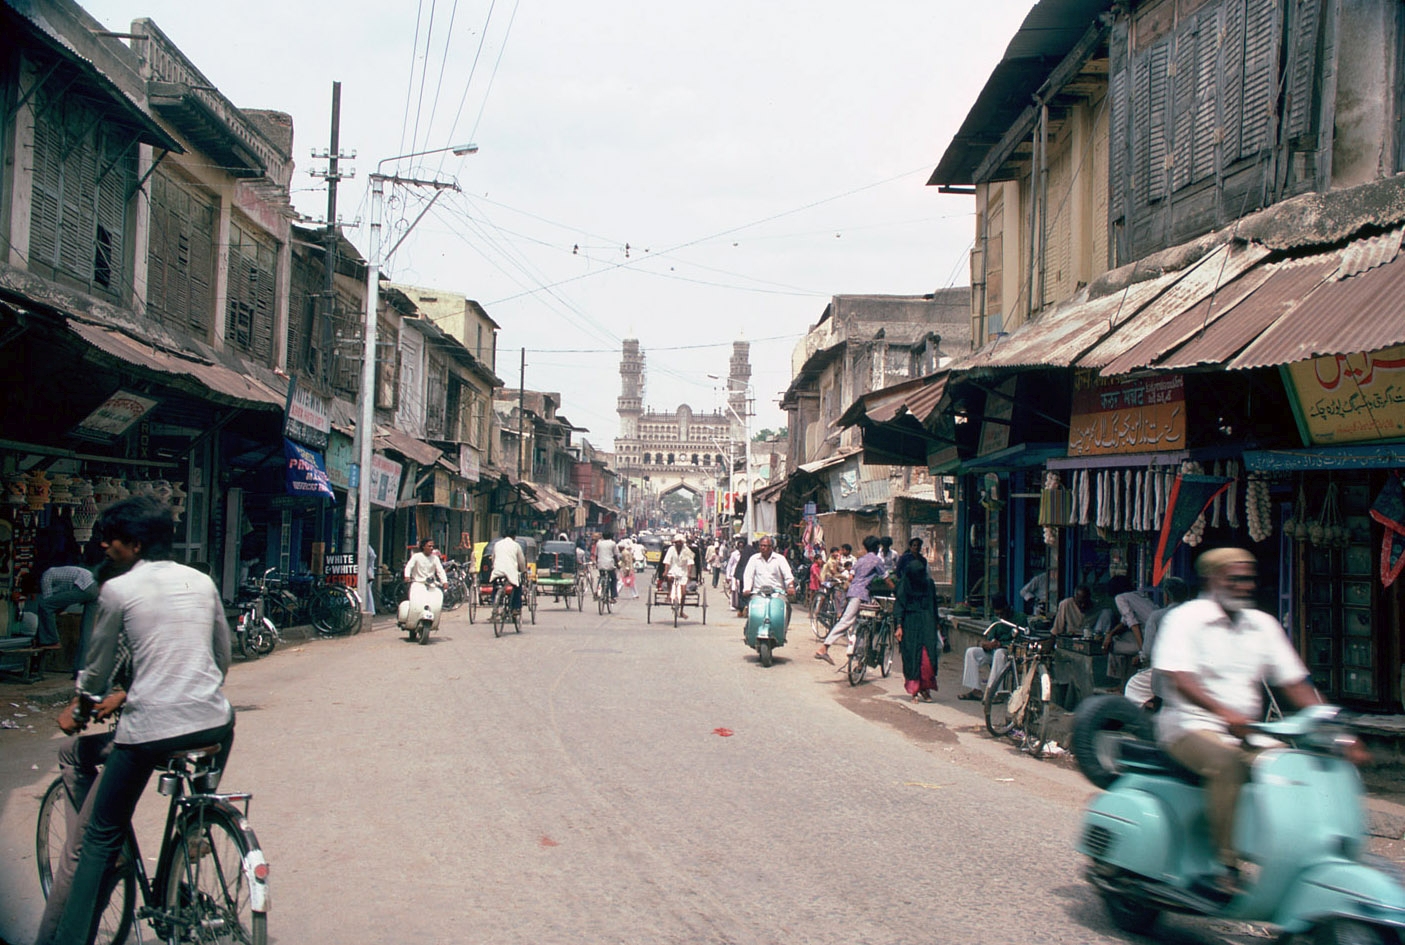 View of the approach to Char Minar from the west through the bazaar, shops on either side of the street